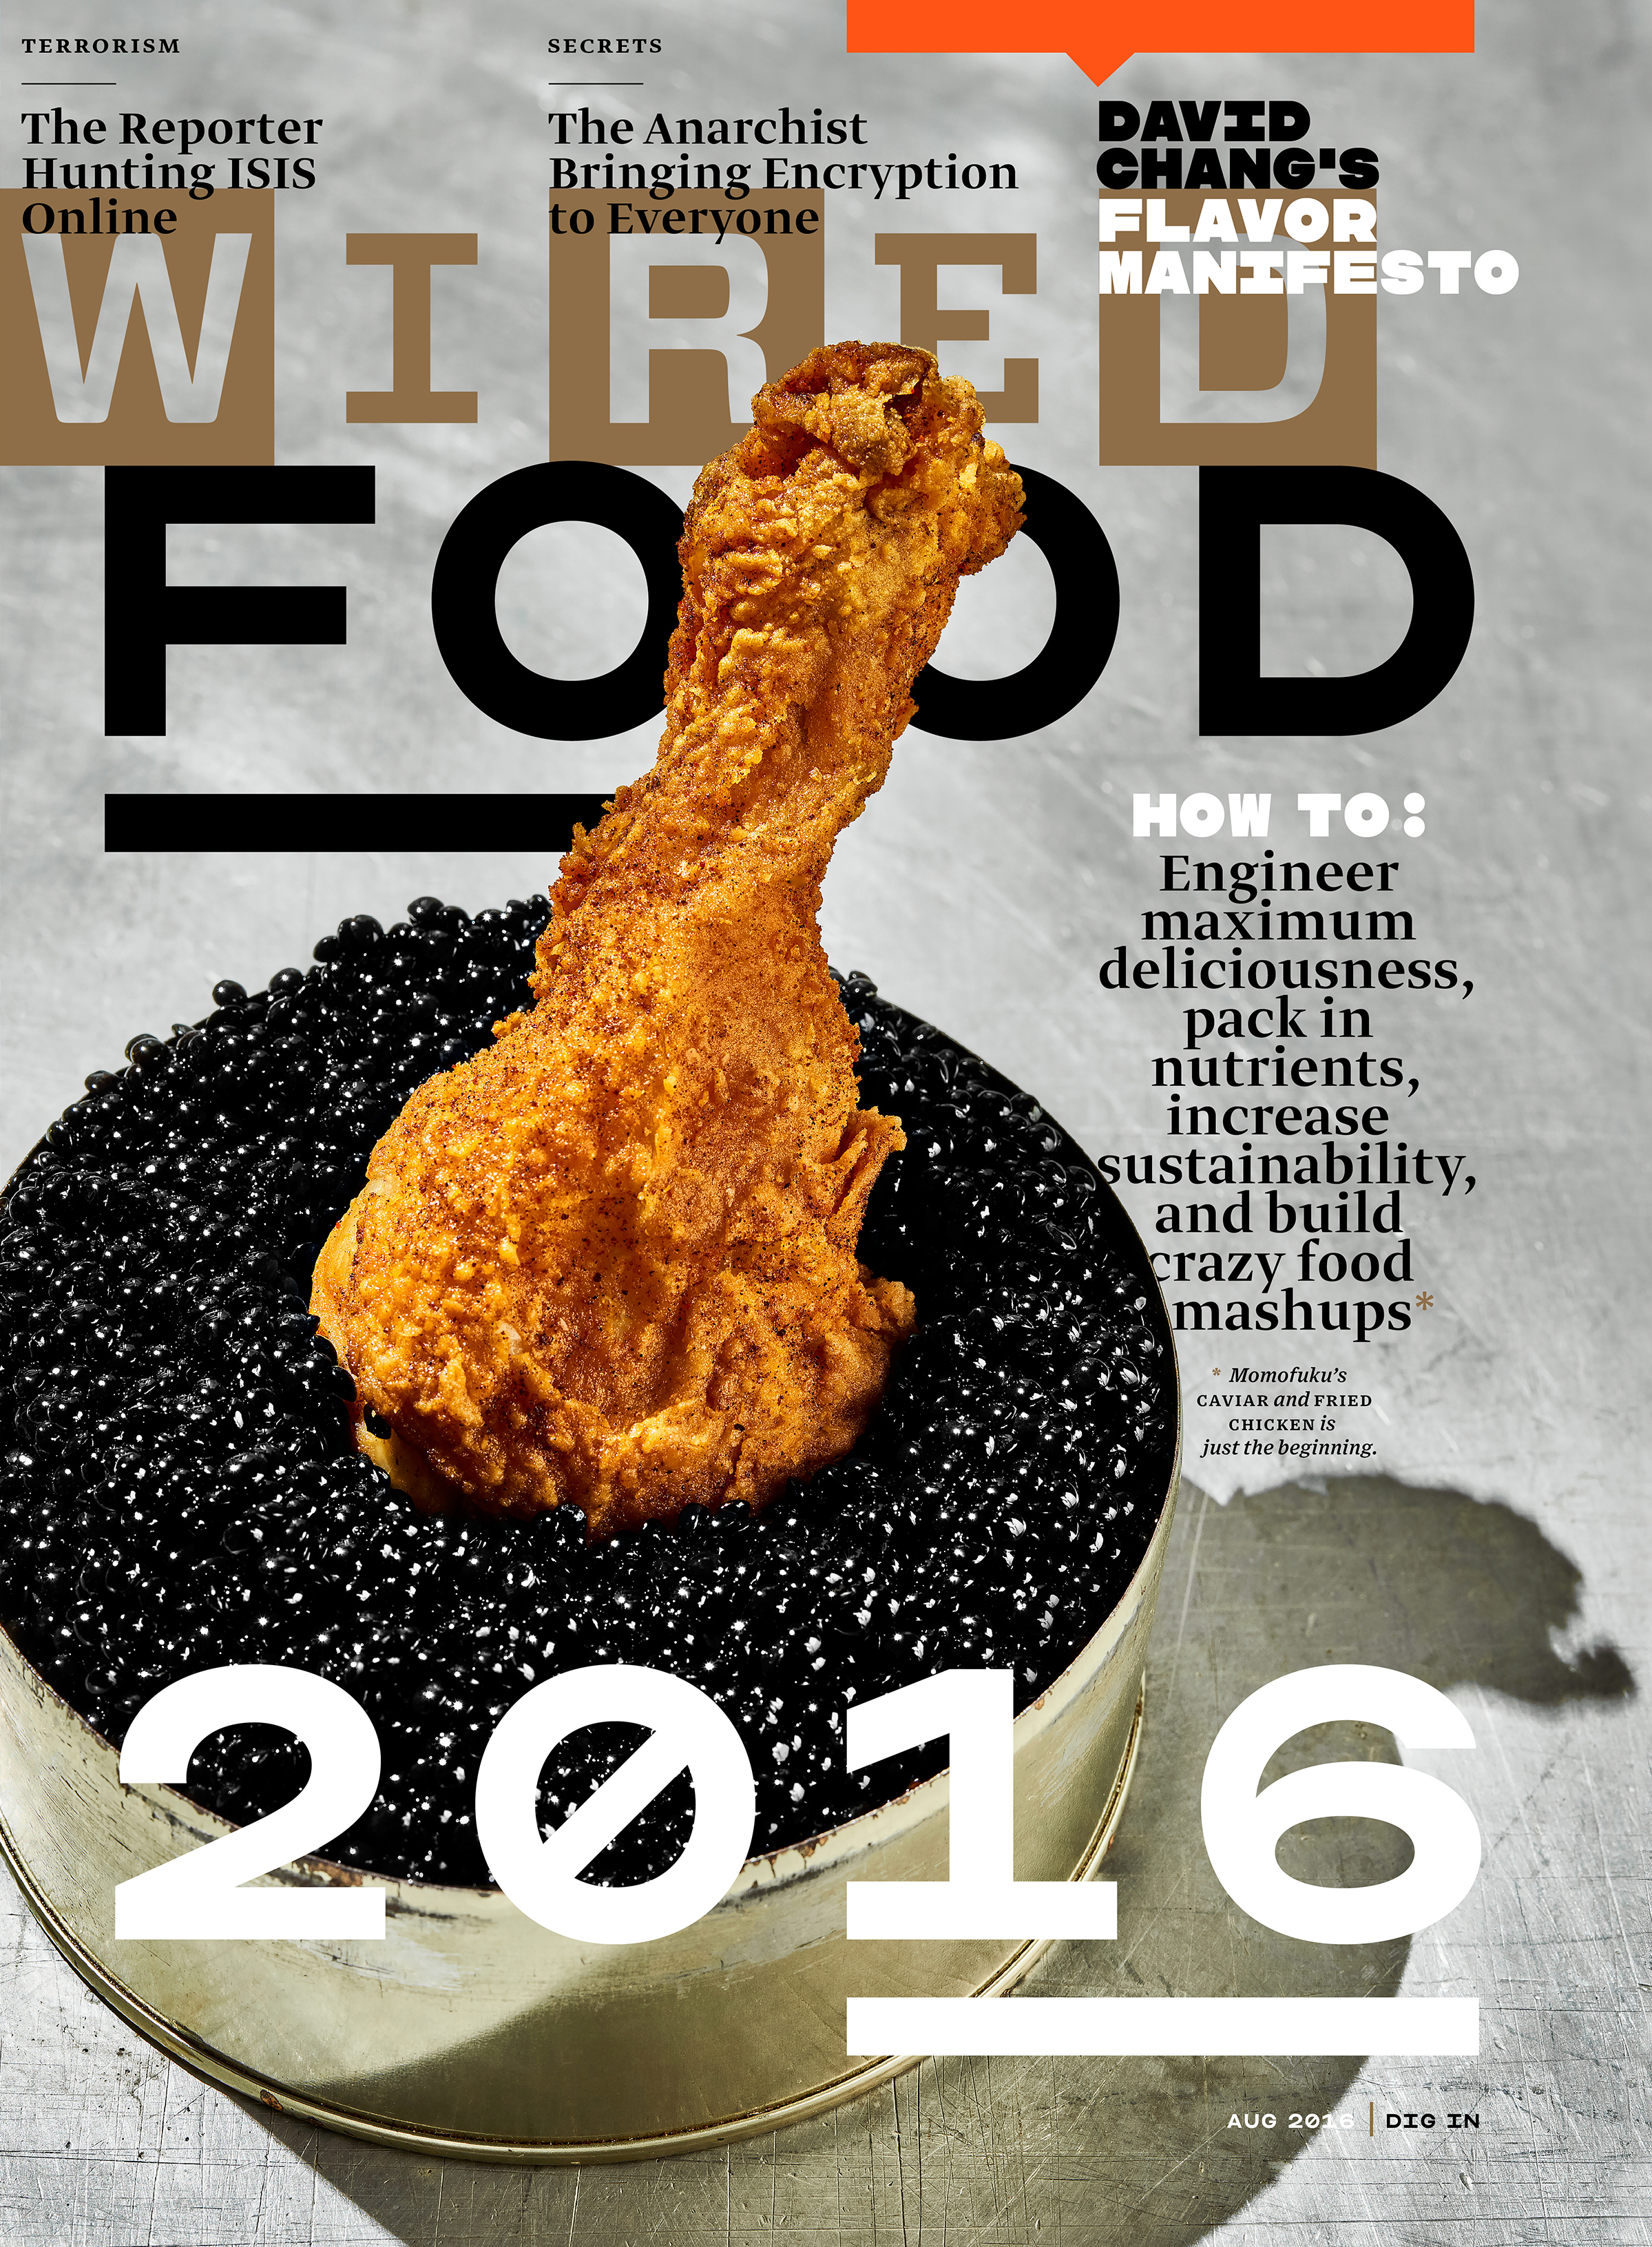 WIRED - "FOOD," August